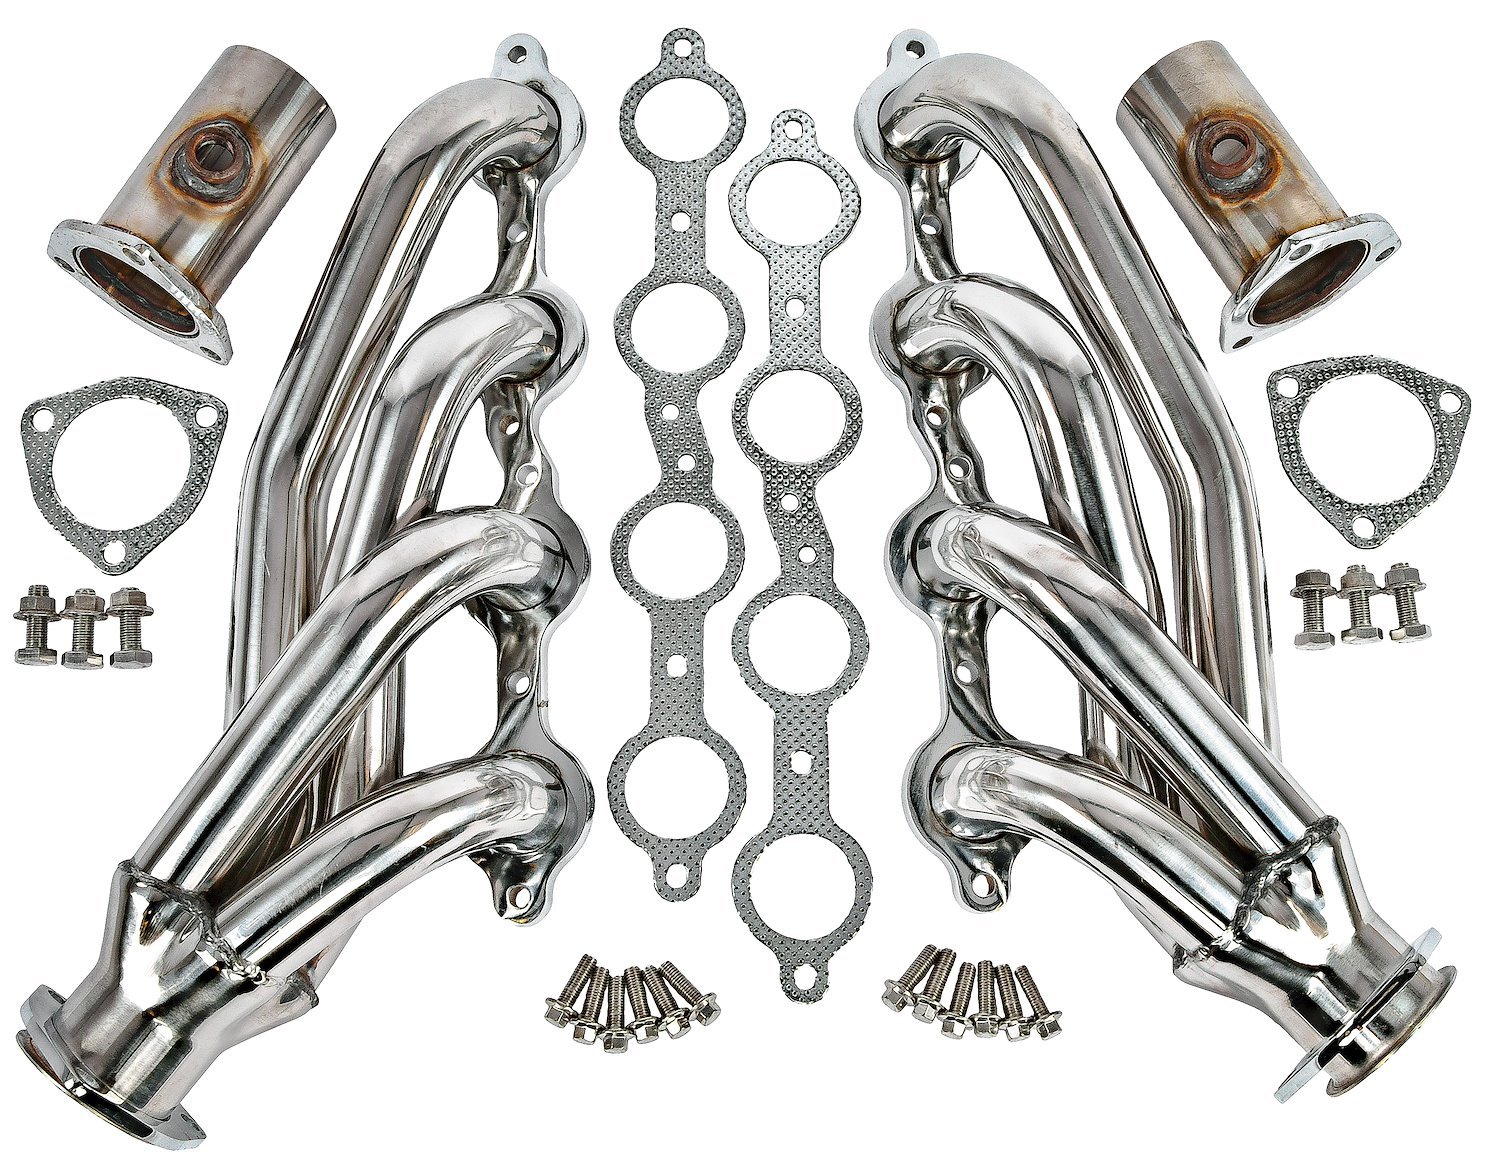 GM LS Shorty Conversion Headers for 1967-1969 Chevy Camaro and 1964-1972 Chevy Chevelle [304 Stainless Steel]